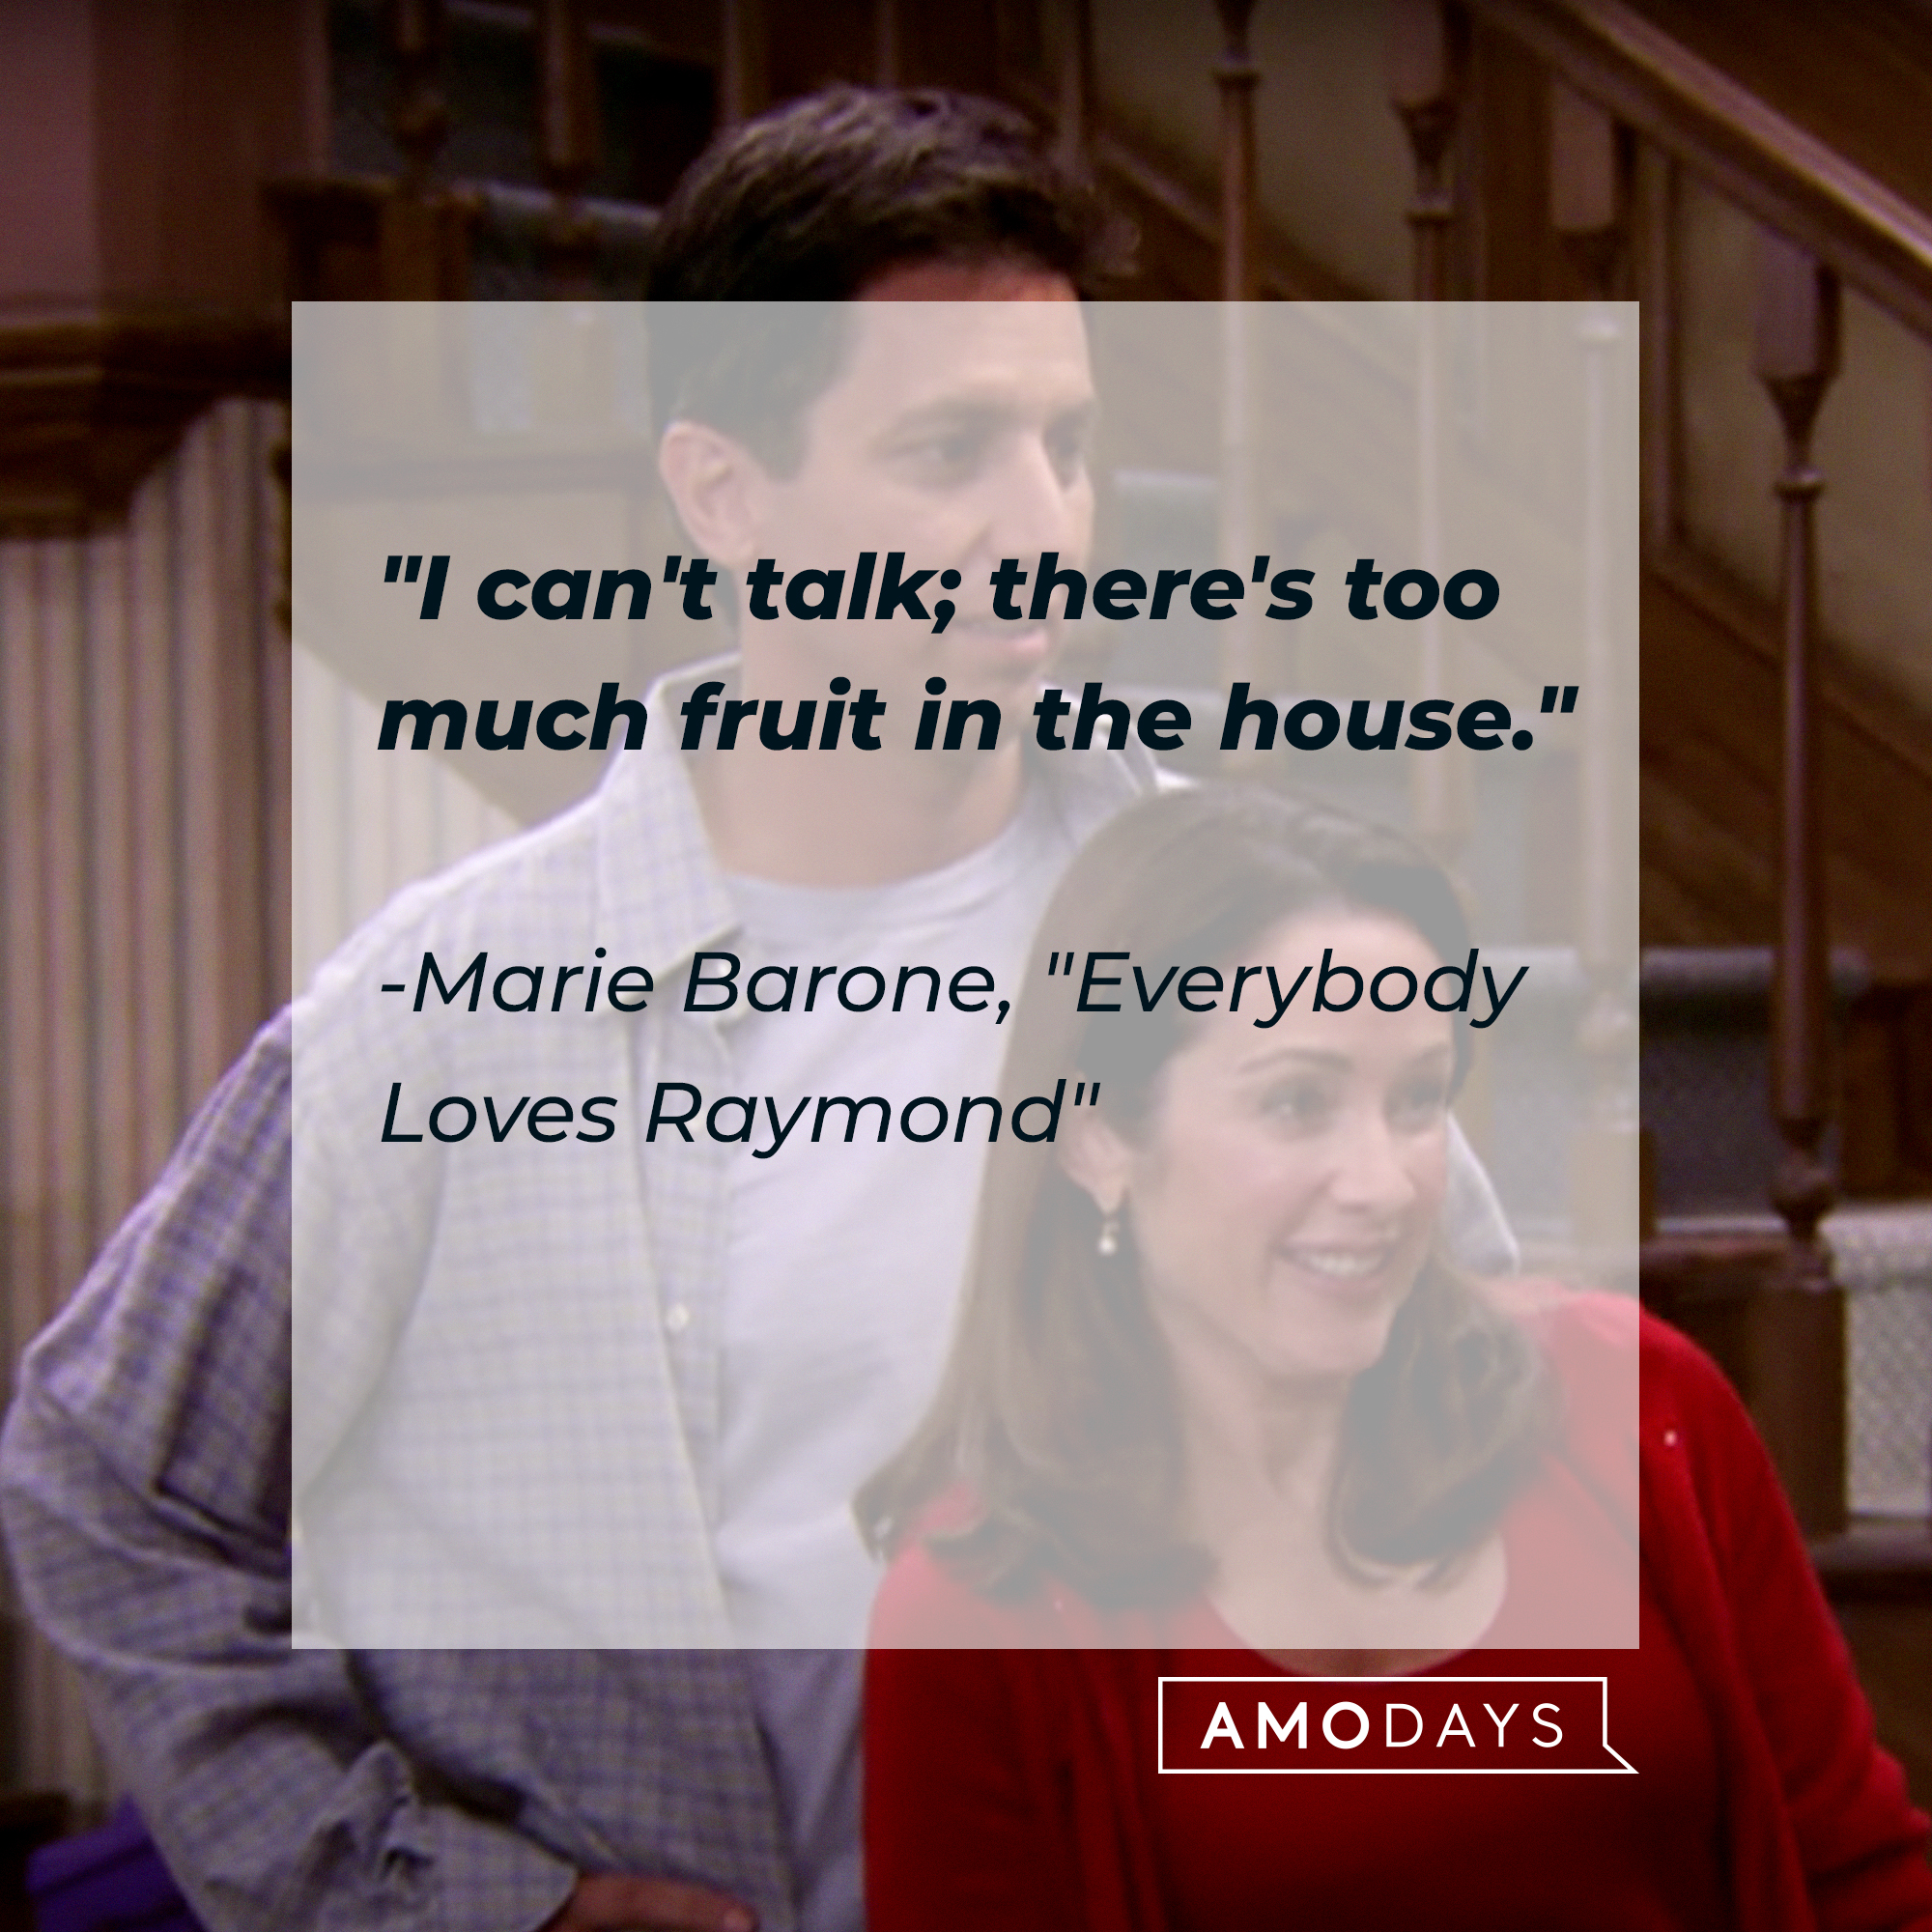 "Everybody Loves Raymond" quote, "I can't talk; there's too much fruit in the house." | Source: Facebook/EverybodyLovesRaymondTVShow